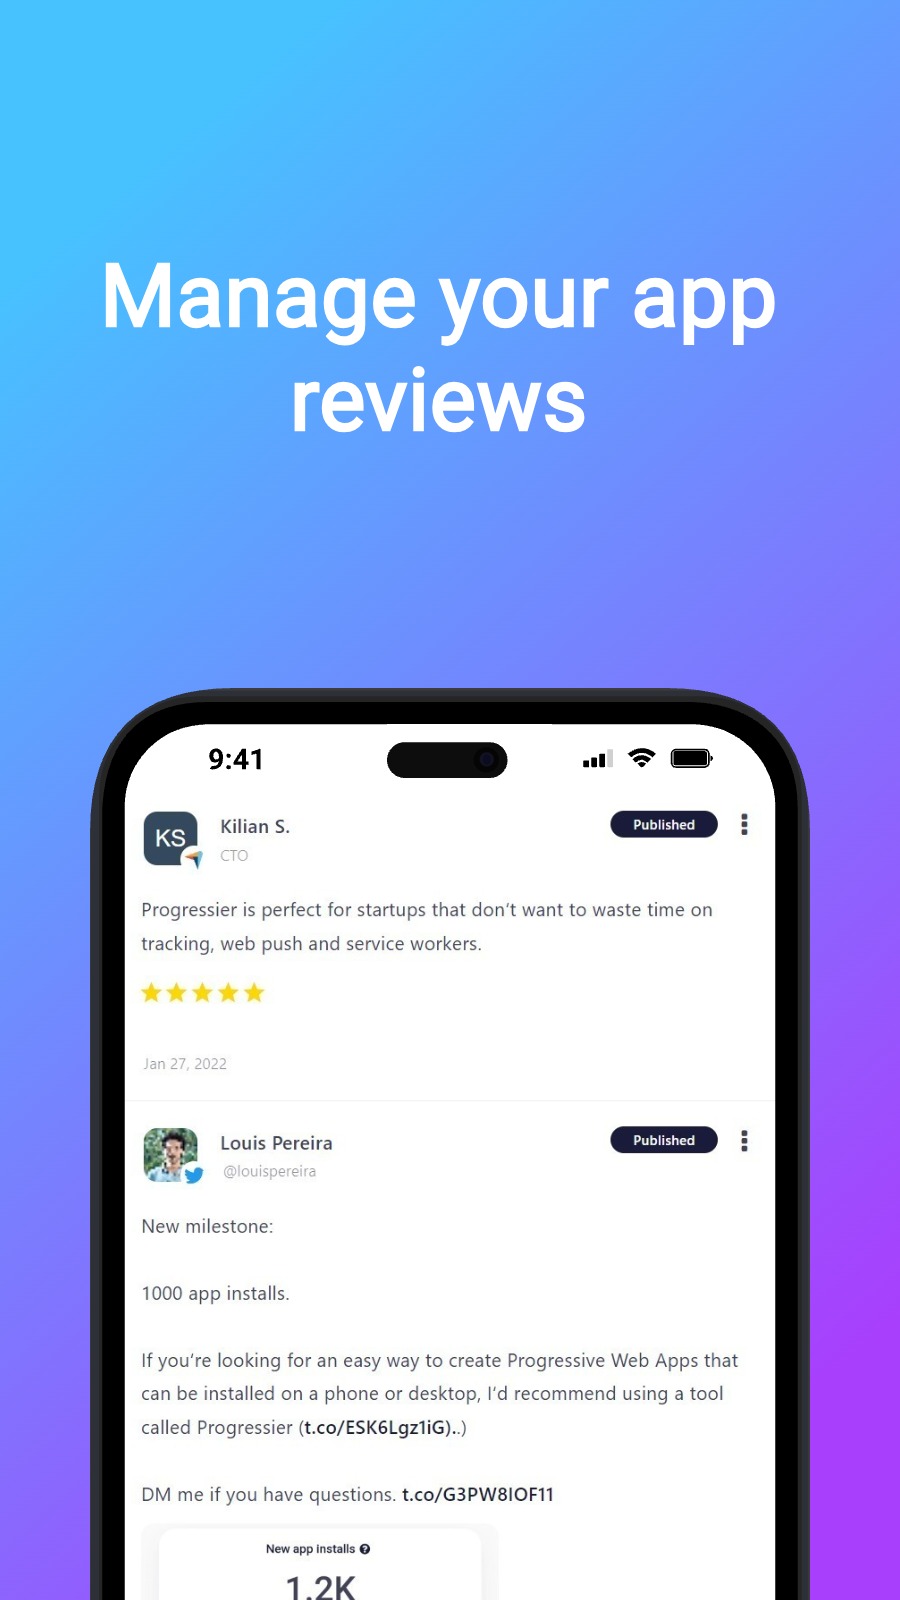 Manage your app reviews